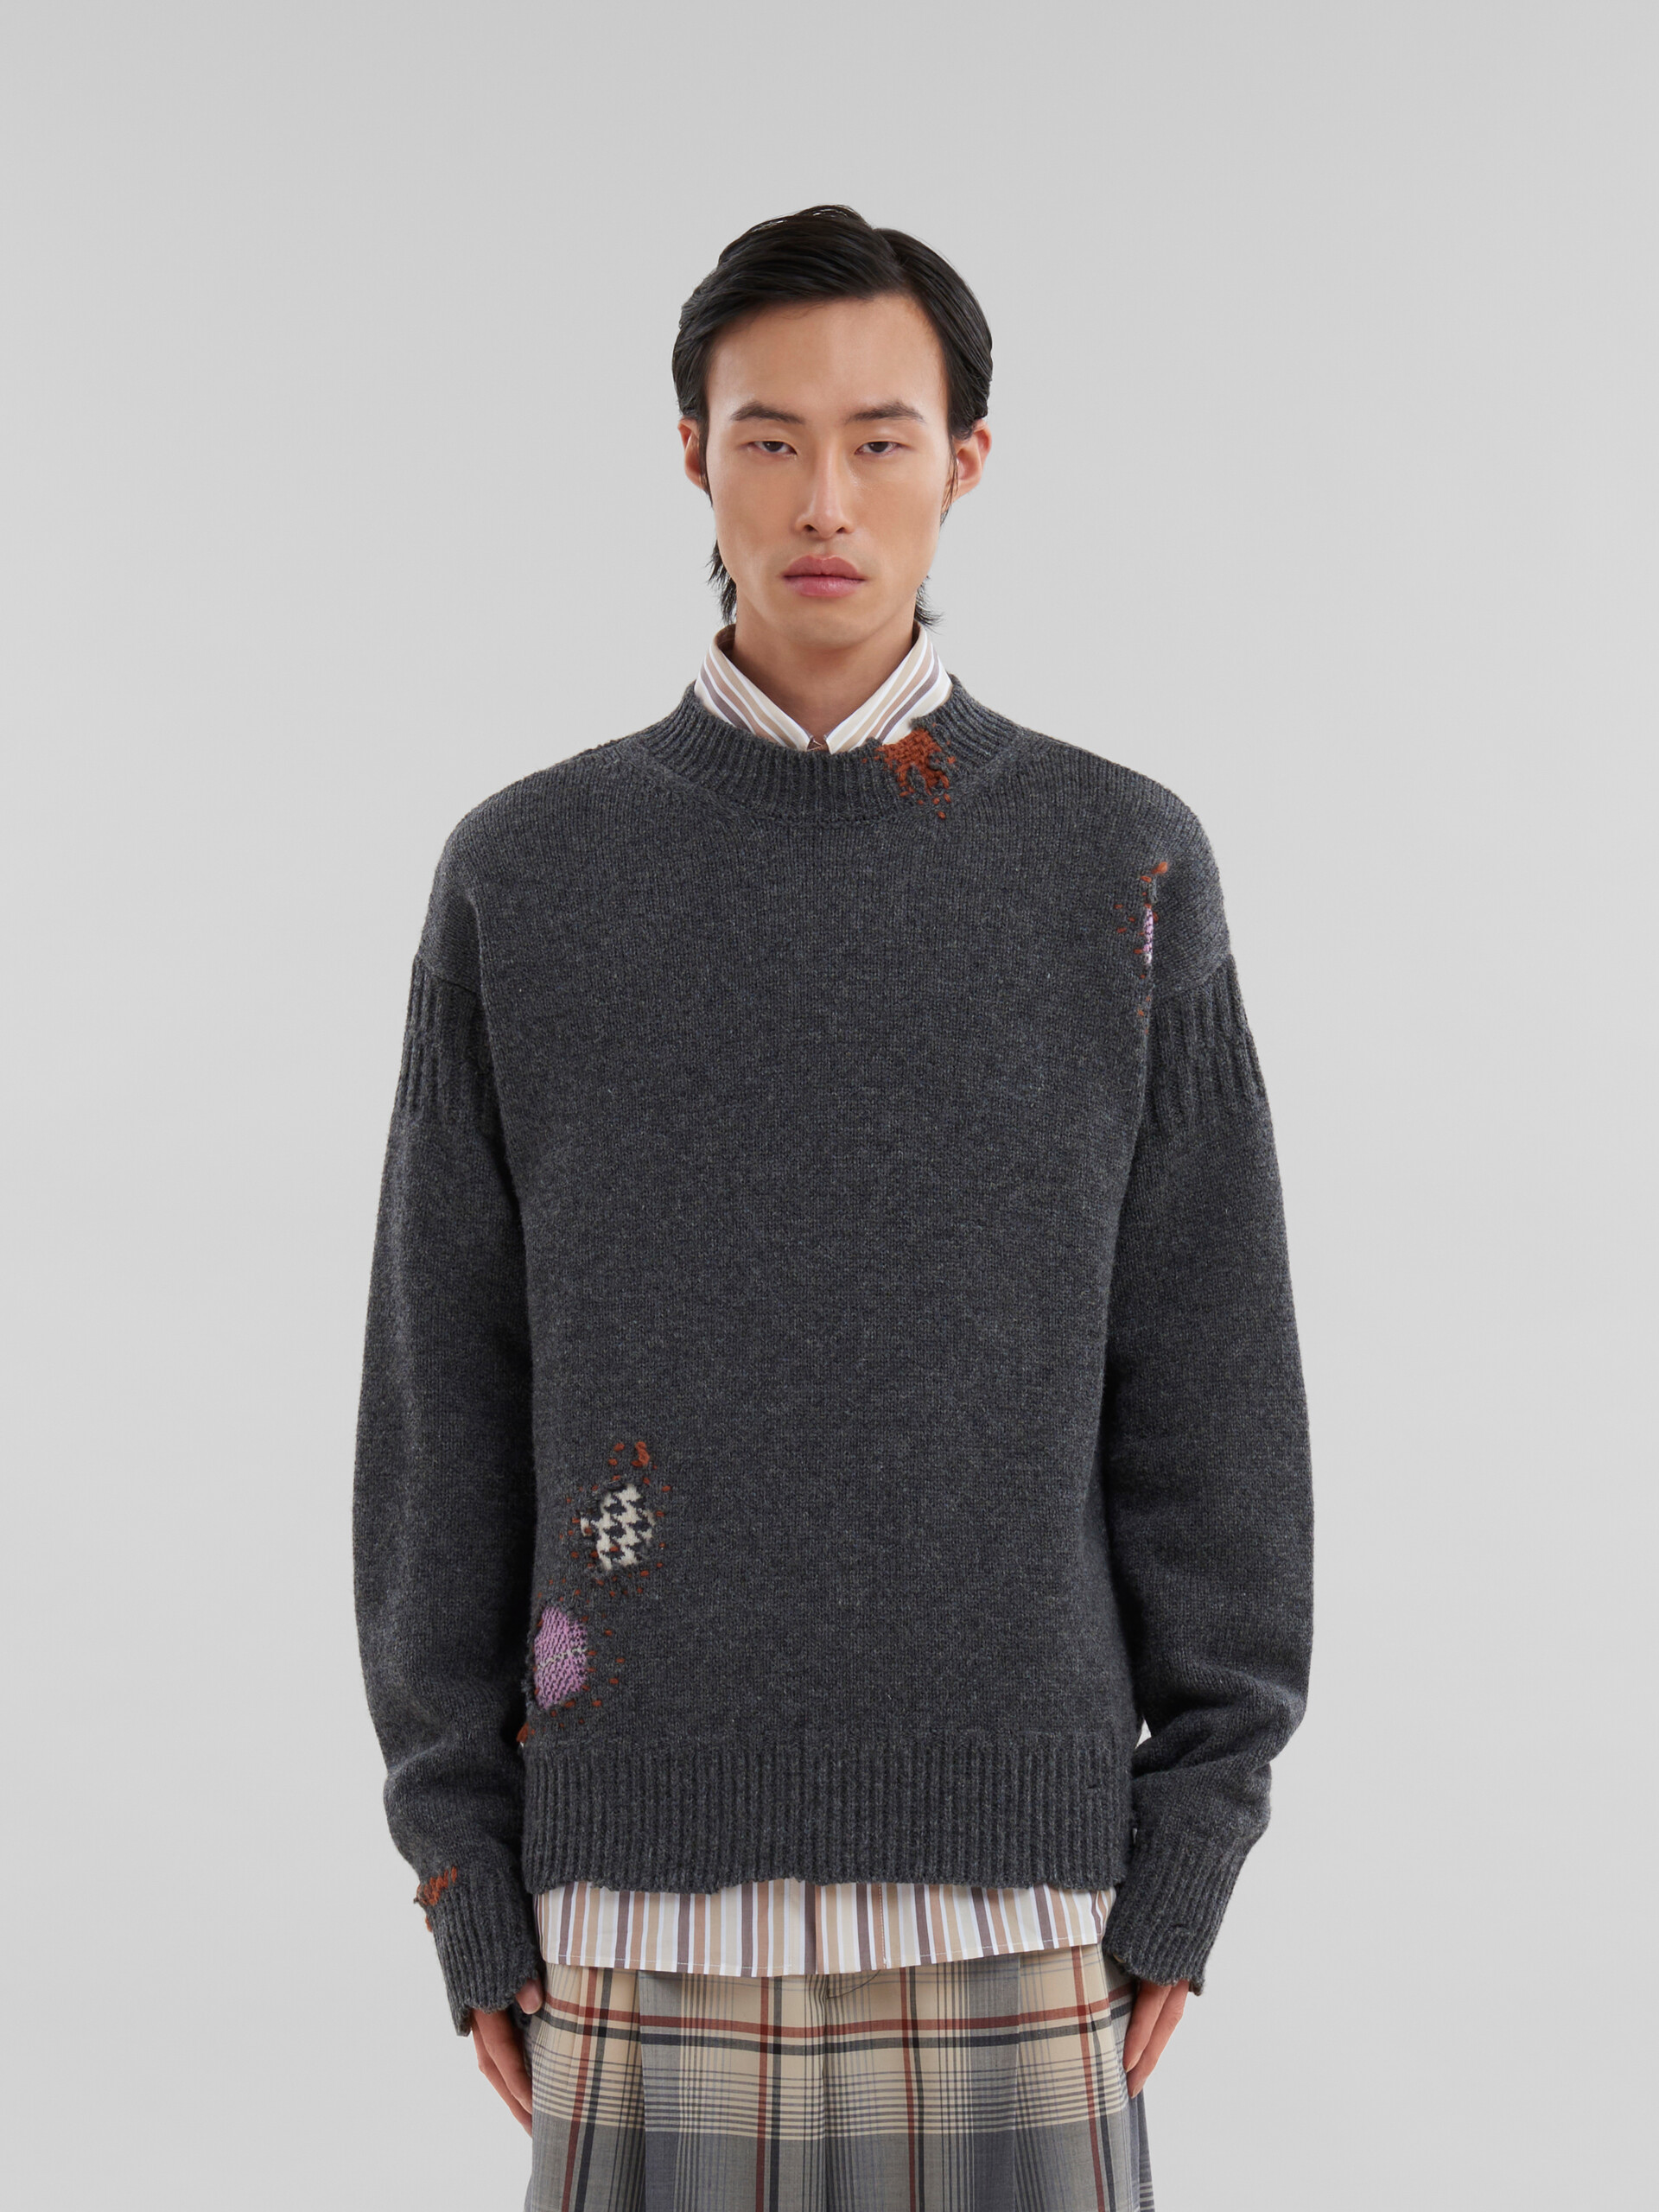 Grey Shetland wool jumper with Marni mending patches - Pullovers - Image 2